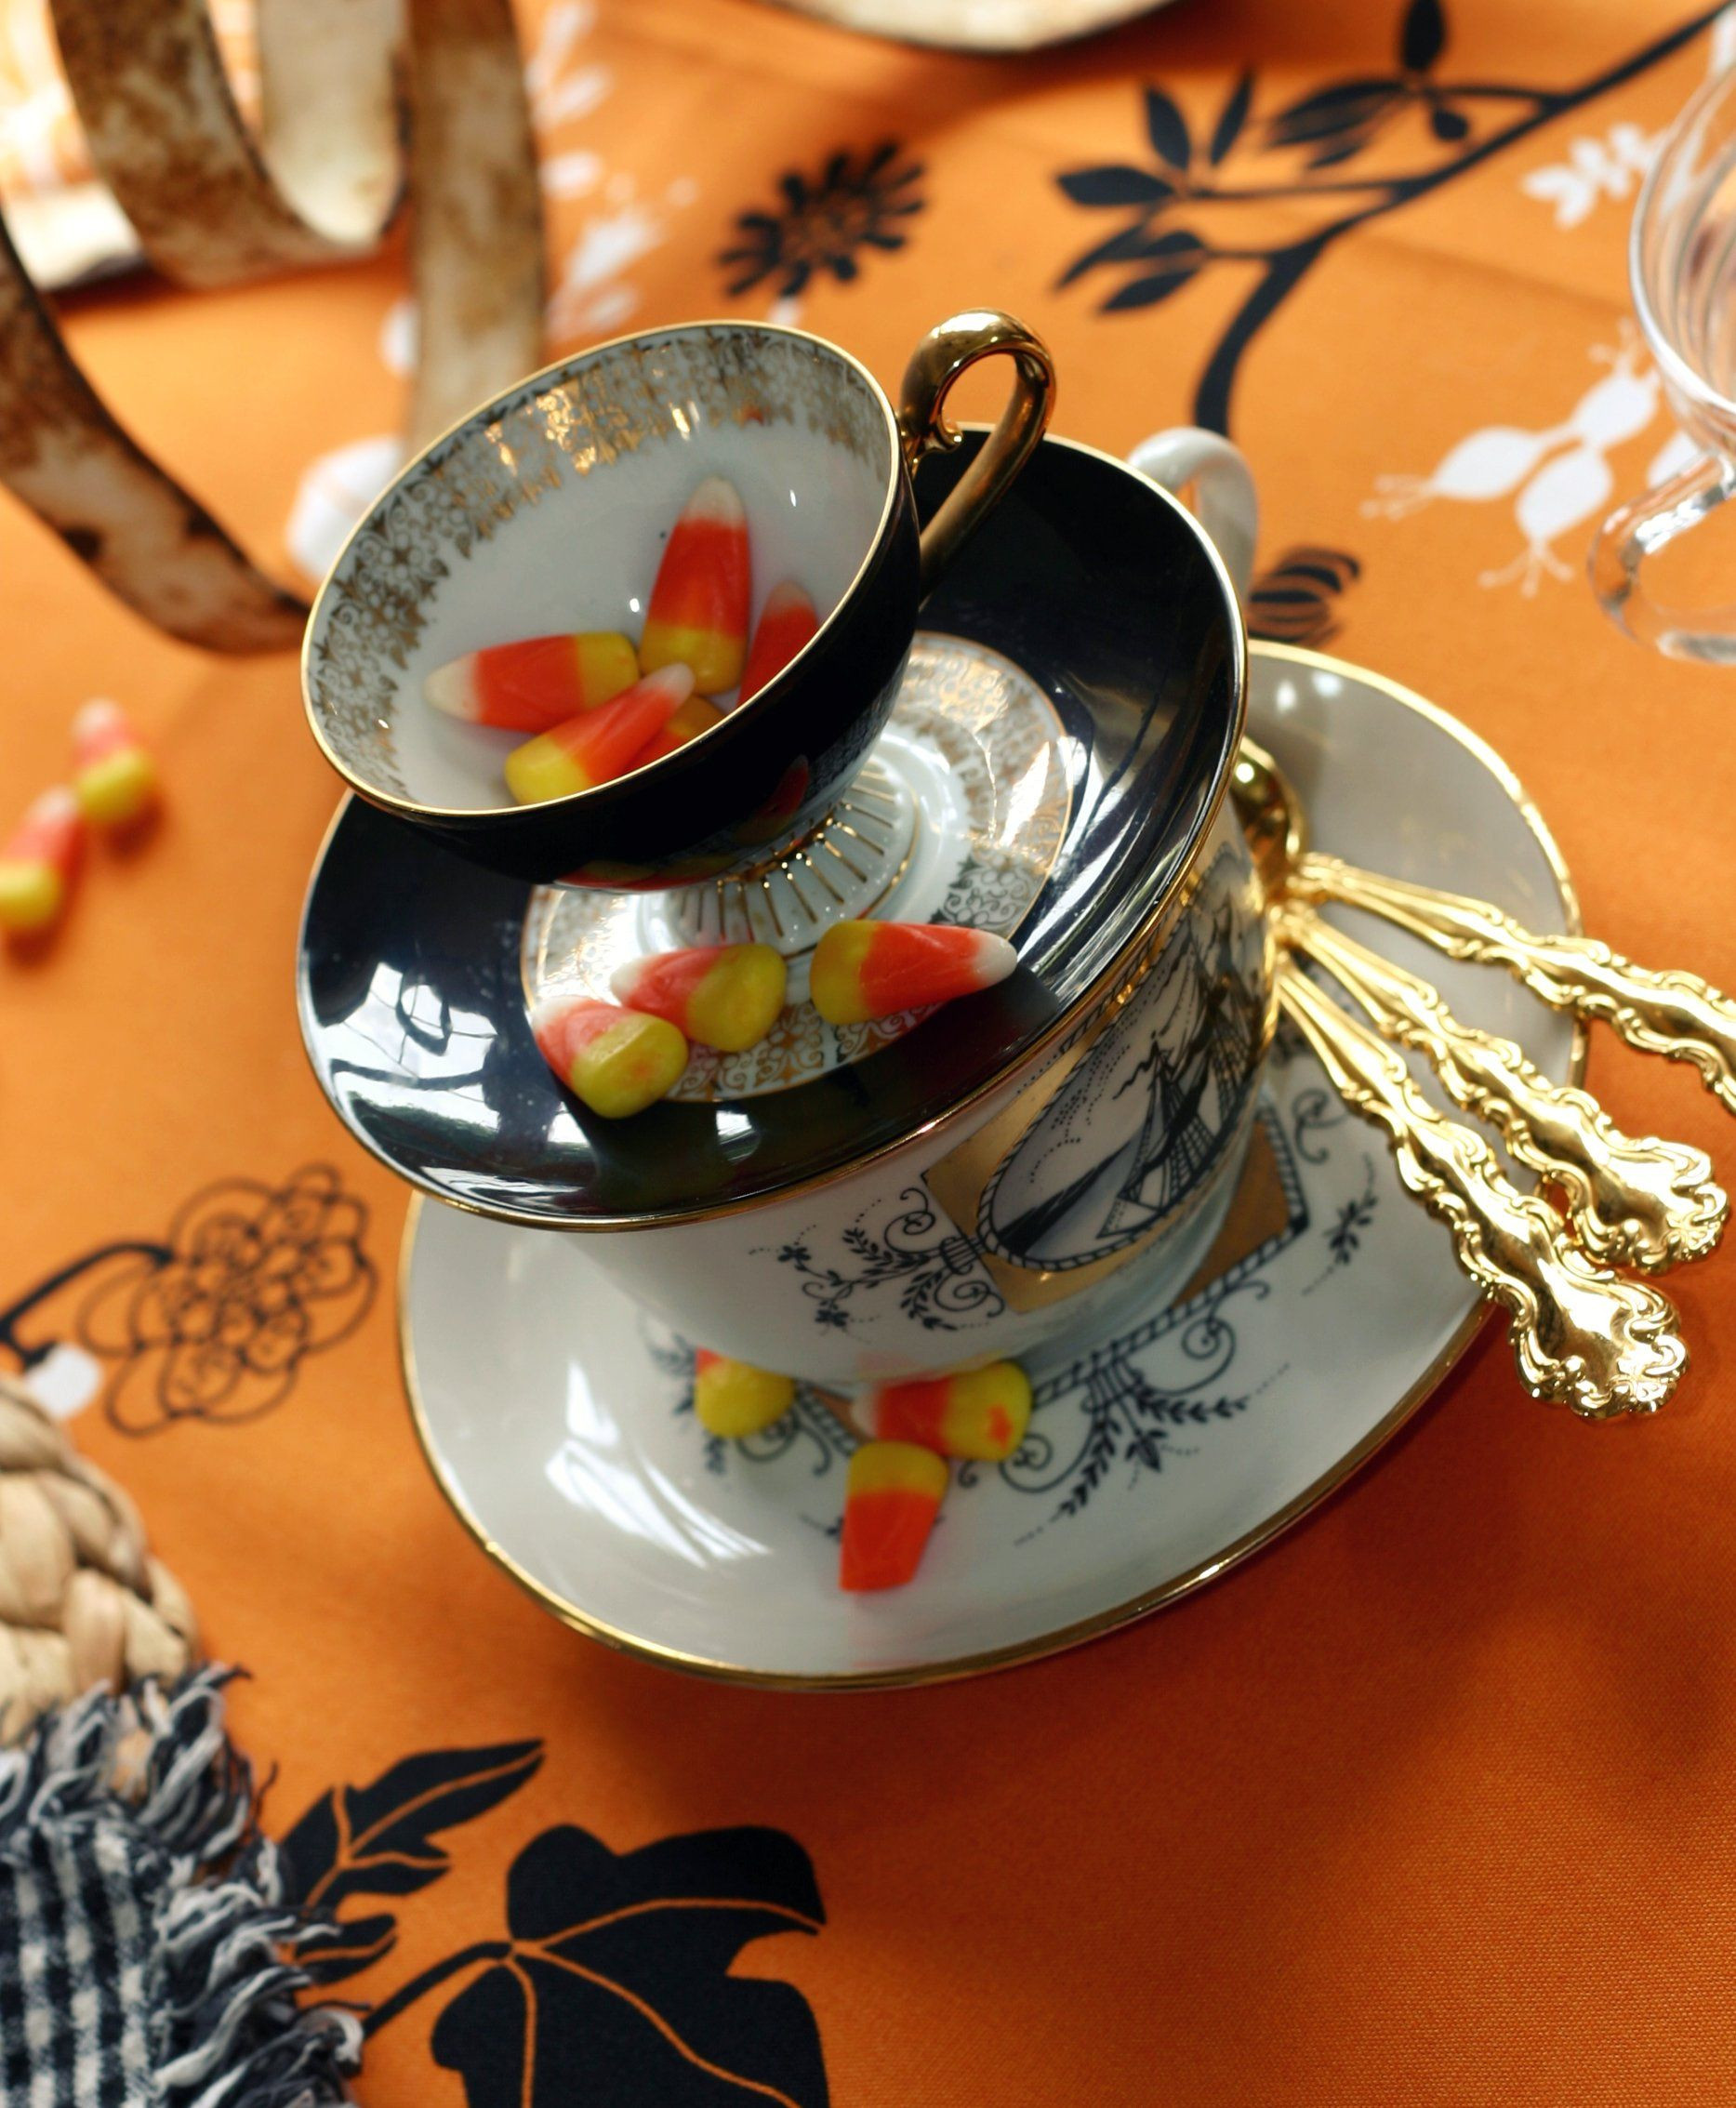 Halloween Tea Party Ideas
 Explore the most amazing Halloween afternoon tea party